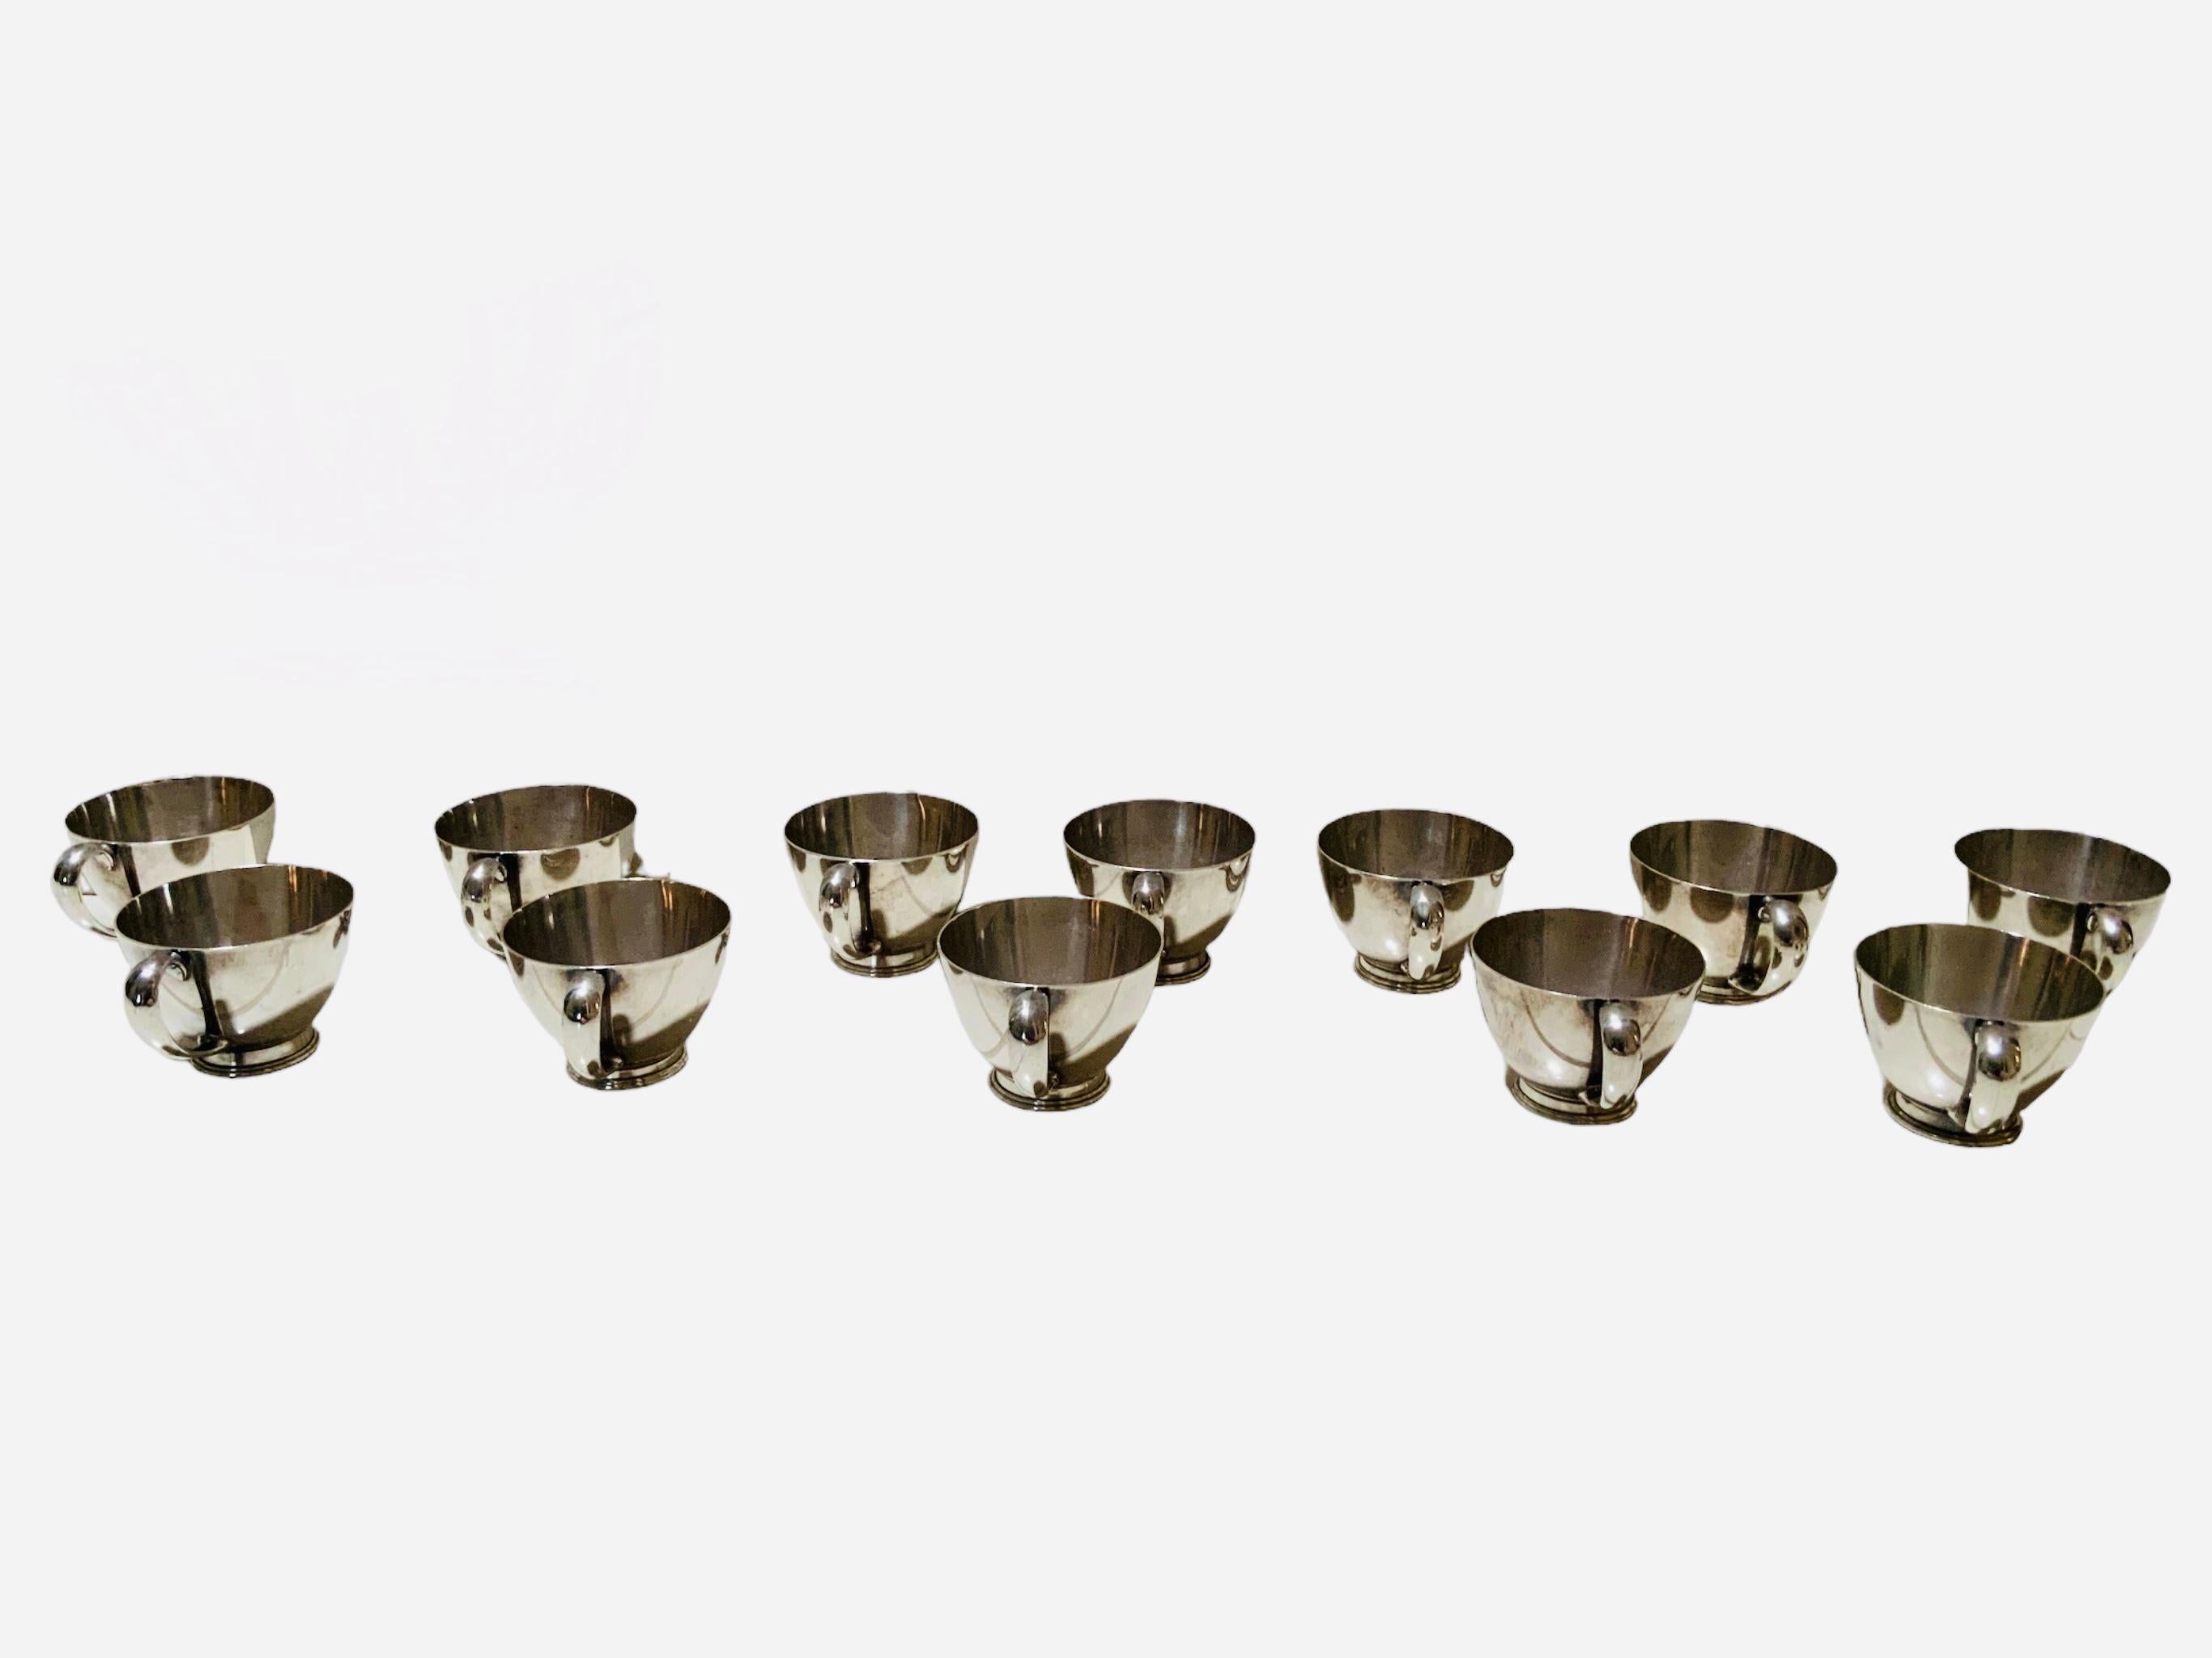 This is a set of twelve Cartier sterling cups. The cups have wide mouths and flared handles.They are adorned with a ribbed round pedestal. Below them, it is found the Cartier hallmark with GWO shields mark and Sterling 224 inscribed.